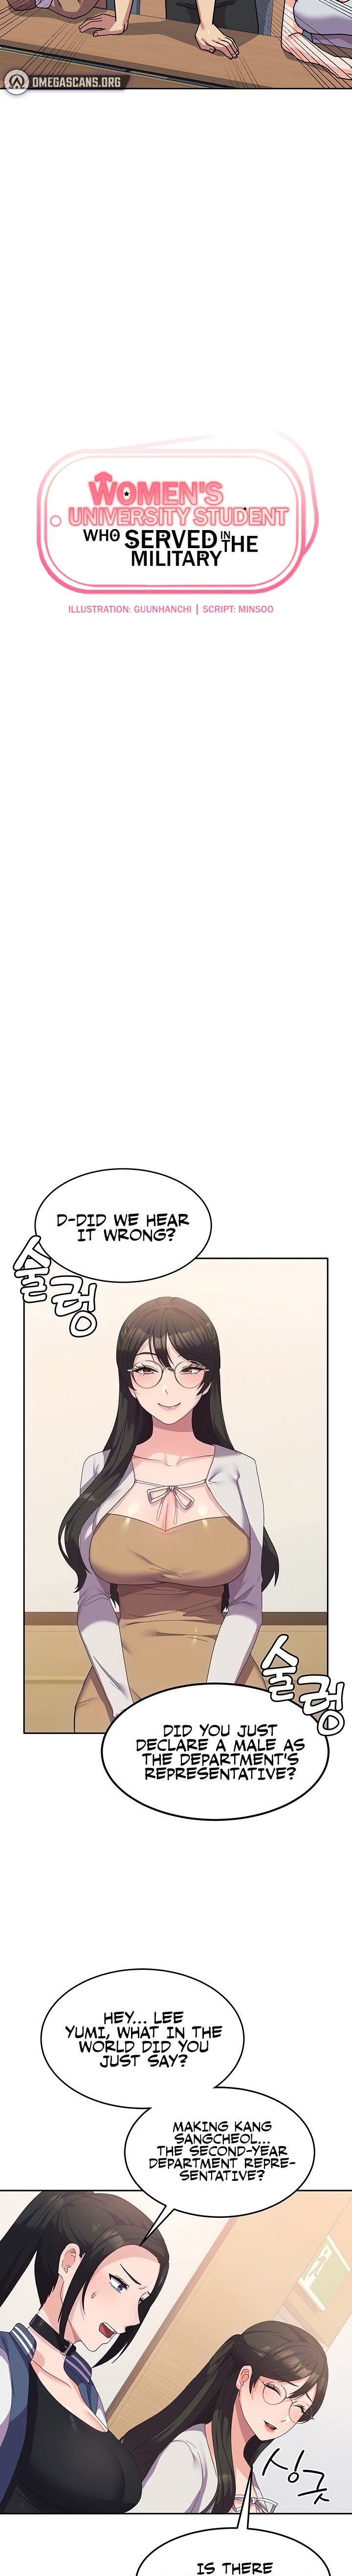 Women’s University Student who Served in the Military - Chapter 18 Page 2